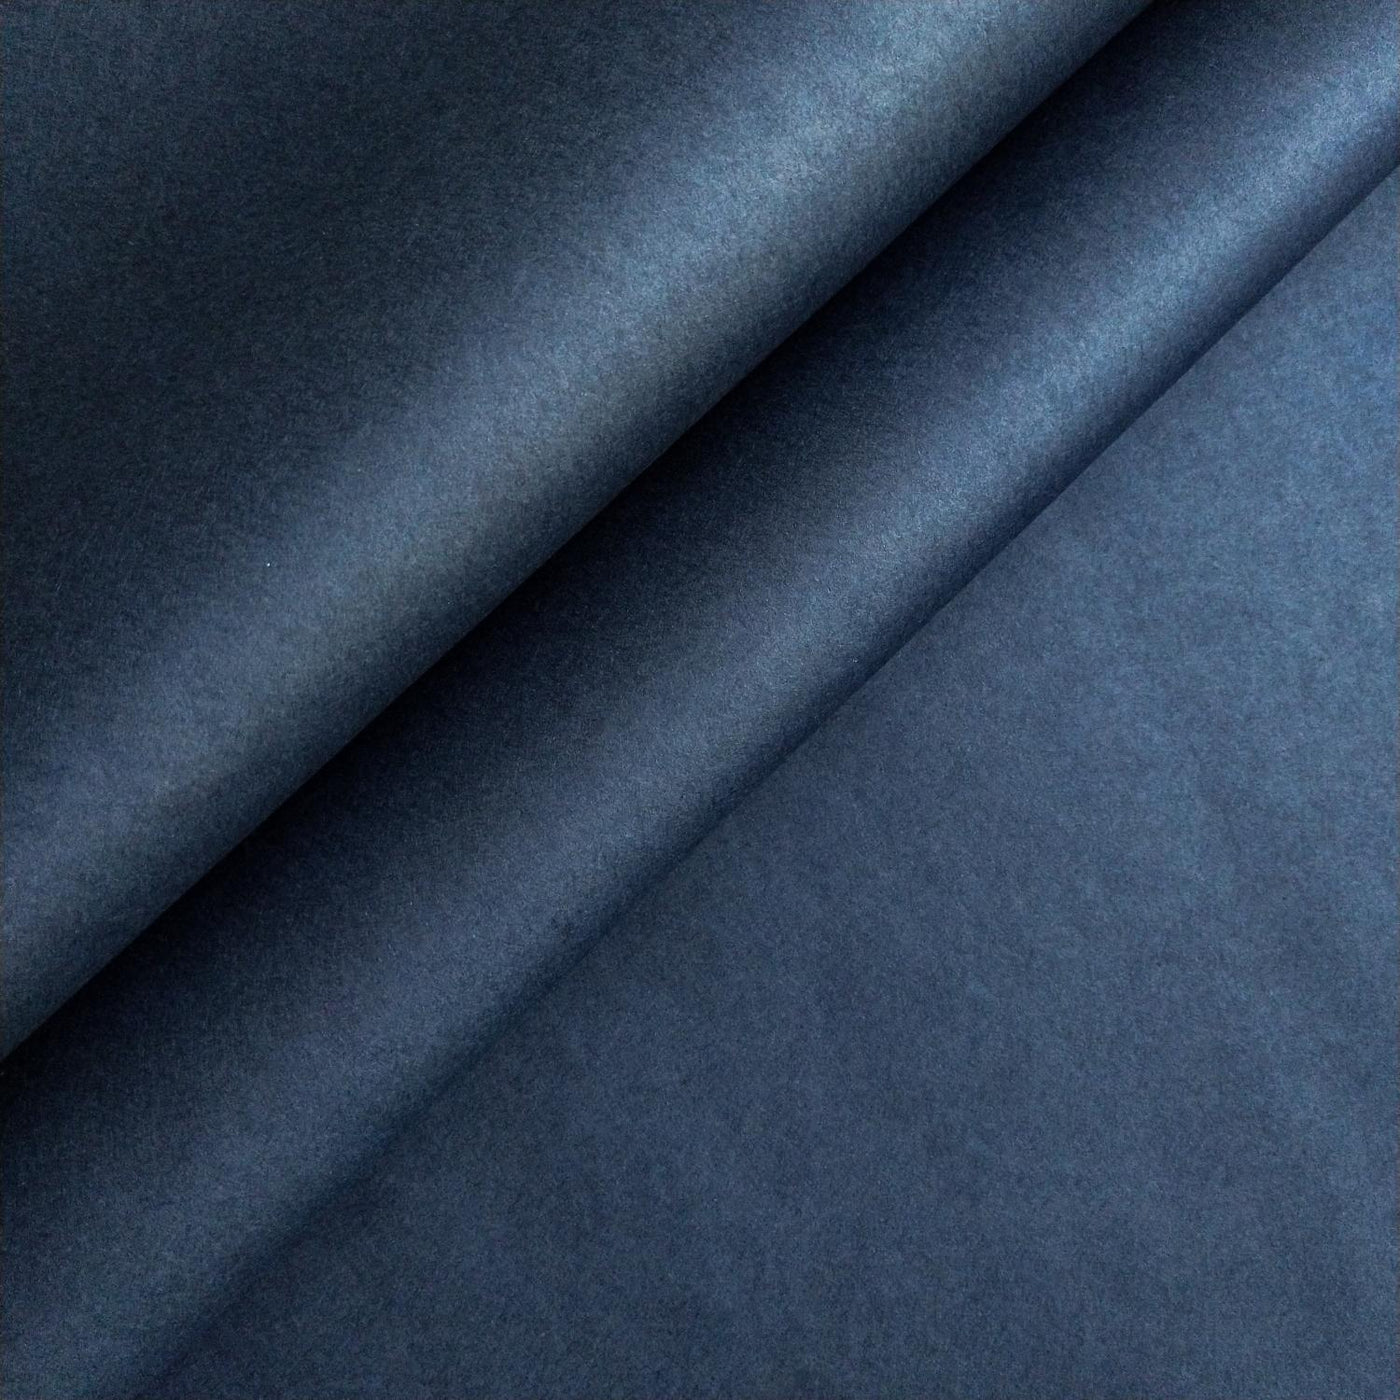 Solid-Colored Kozo Mulberry Paper (Denim Blue)